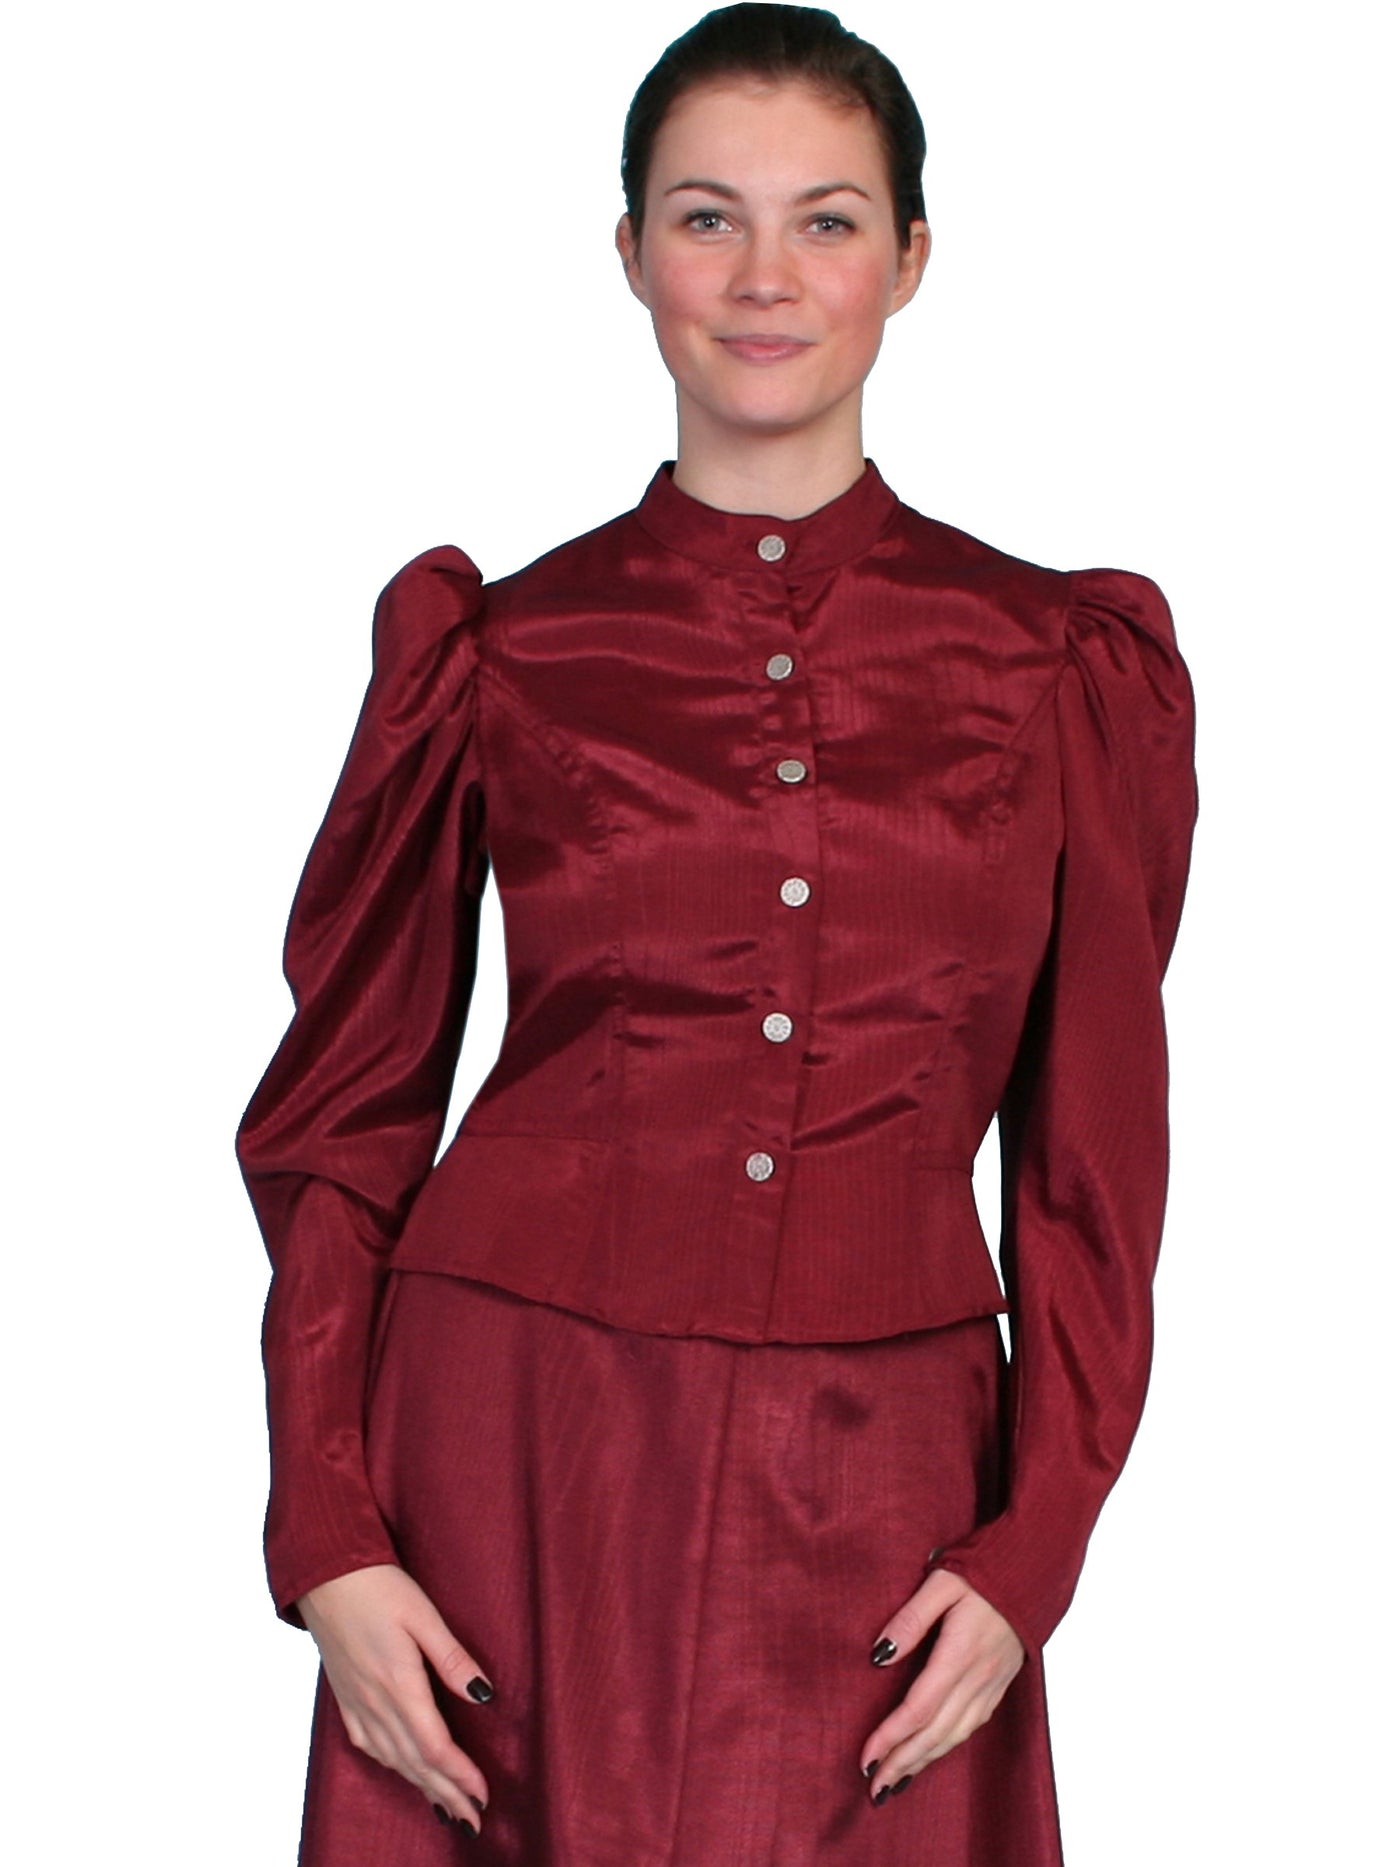 Victorian Style Puff Sleeves Blouse in Burgundy - SOLD OUT